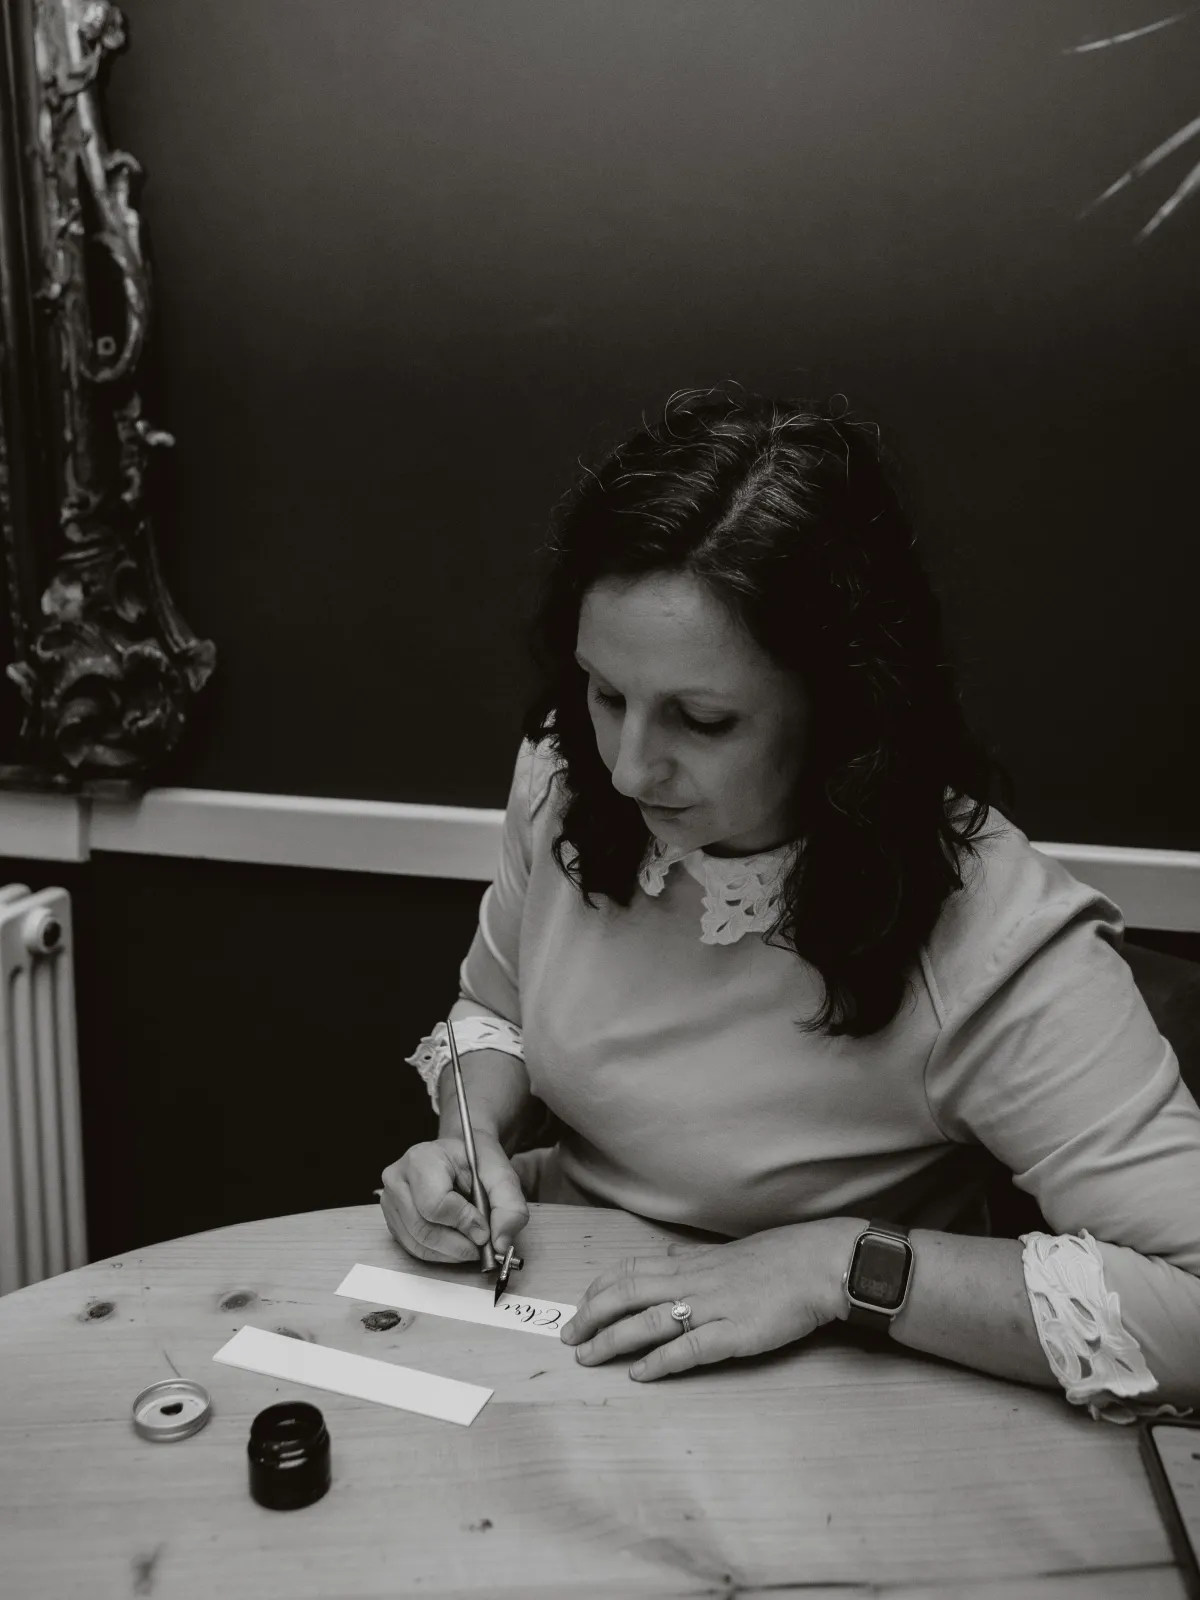 The Oxford Calligrapher doing modern calligraphy with a pointed pen